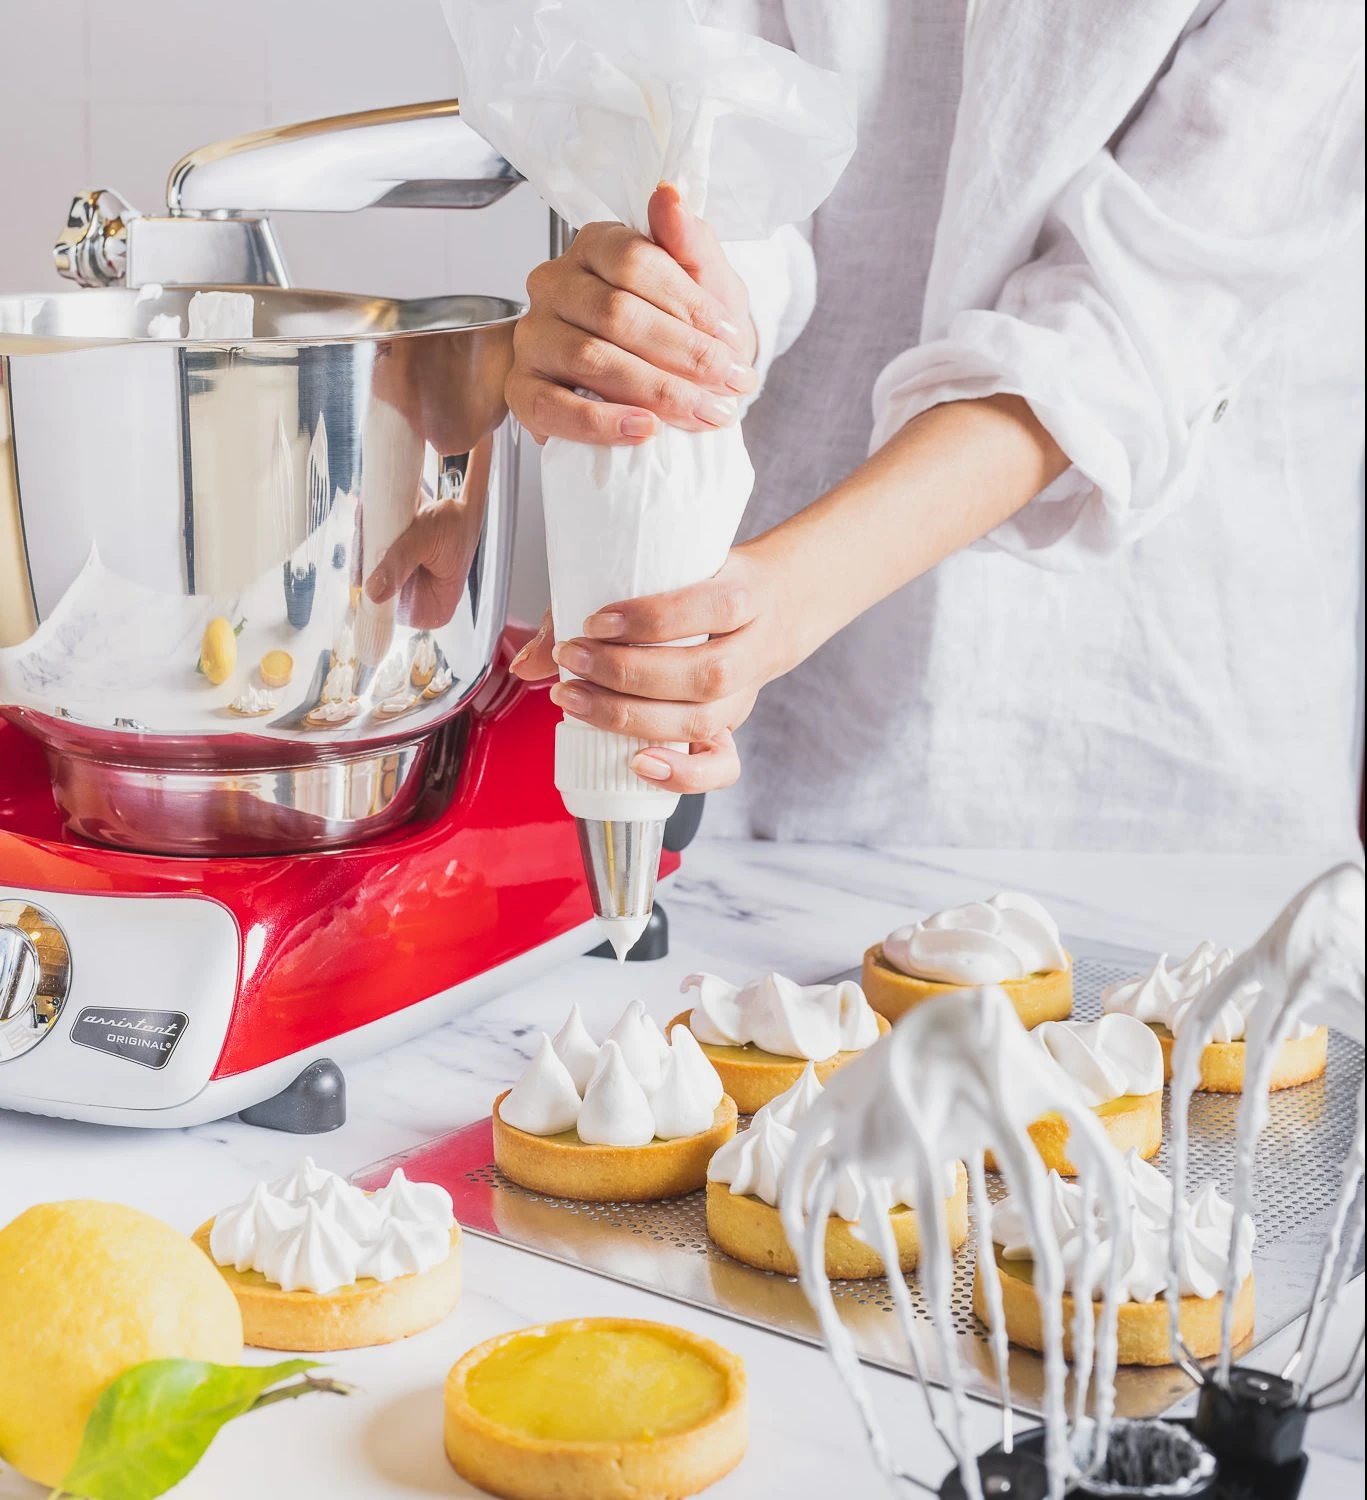 Ankarsrum Assistent Original - The best Stand Mixer with endless